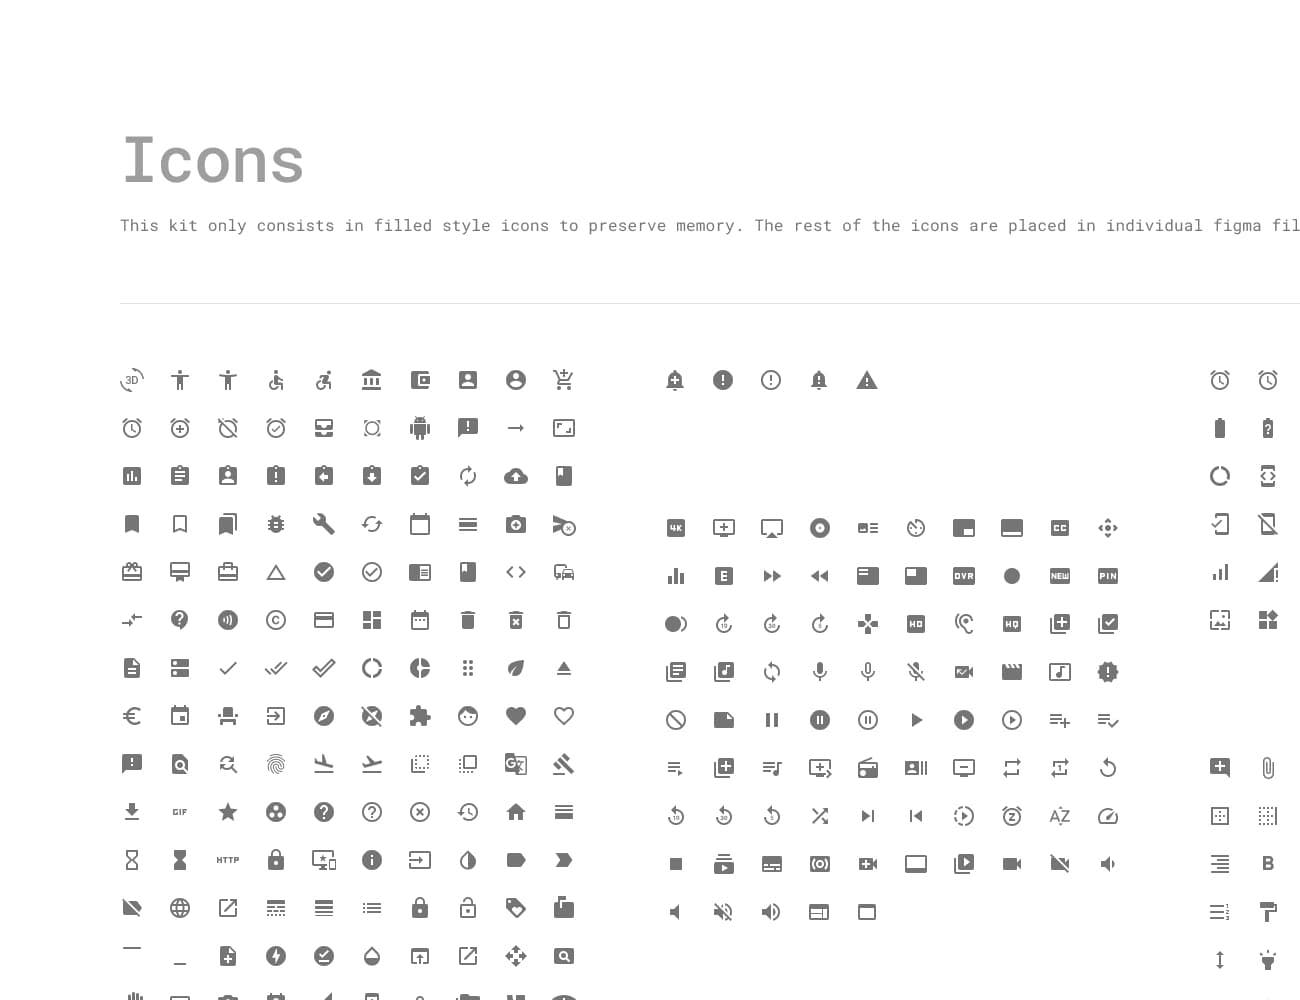 A bunch of icons available with the Material UI Design Kits.